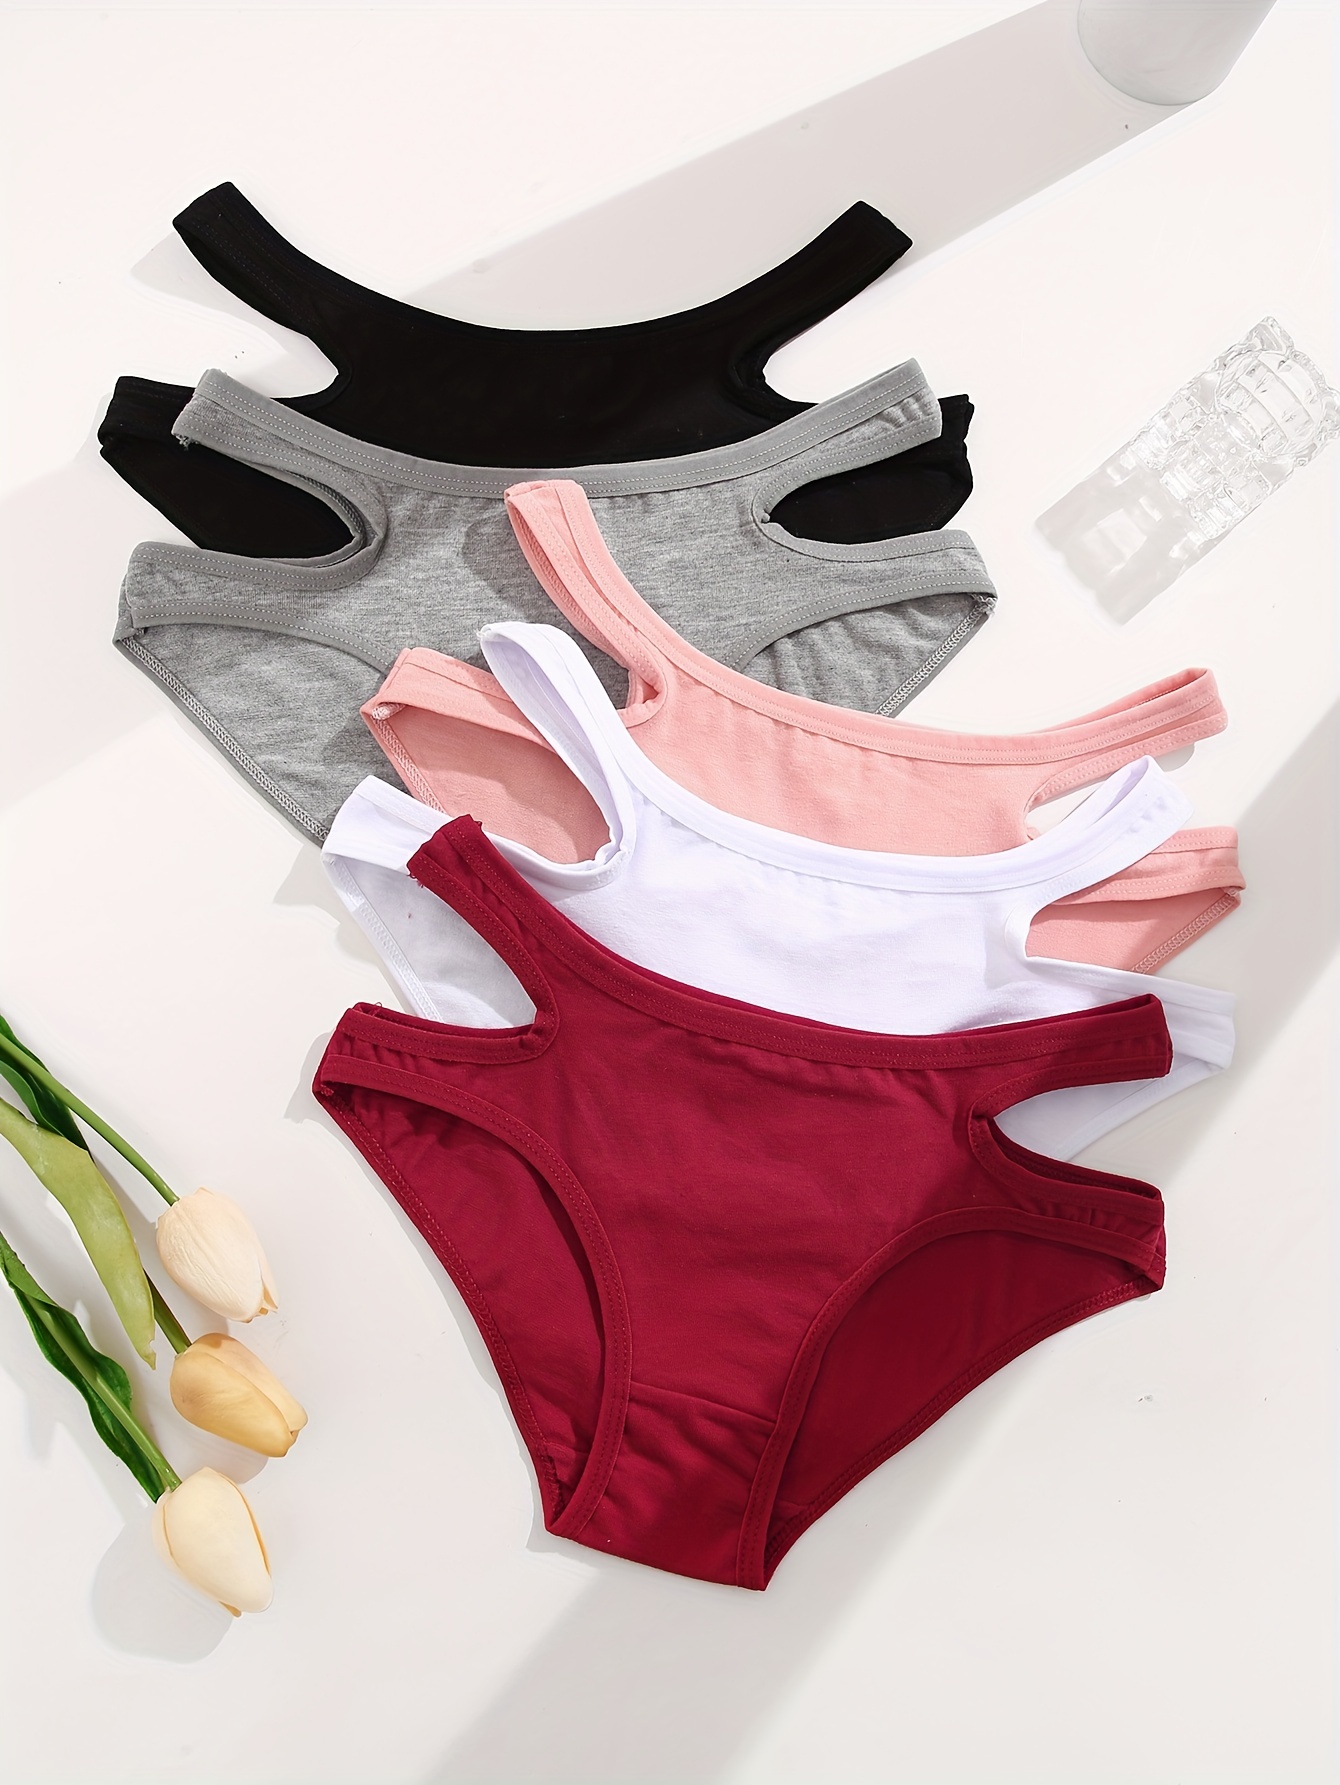 5Pcs/Set Cotton Women Panties Breathable Underwear Lovely Young